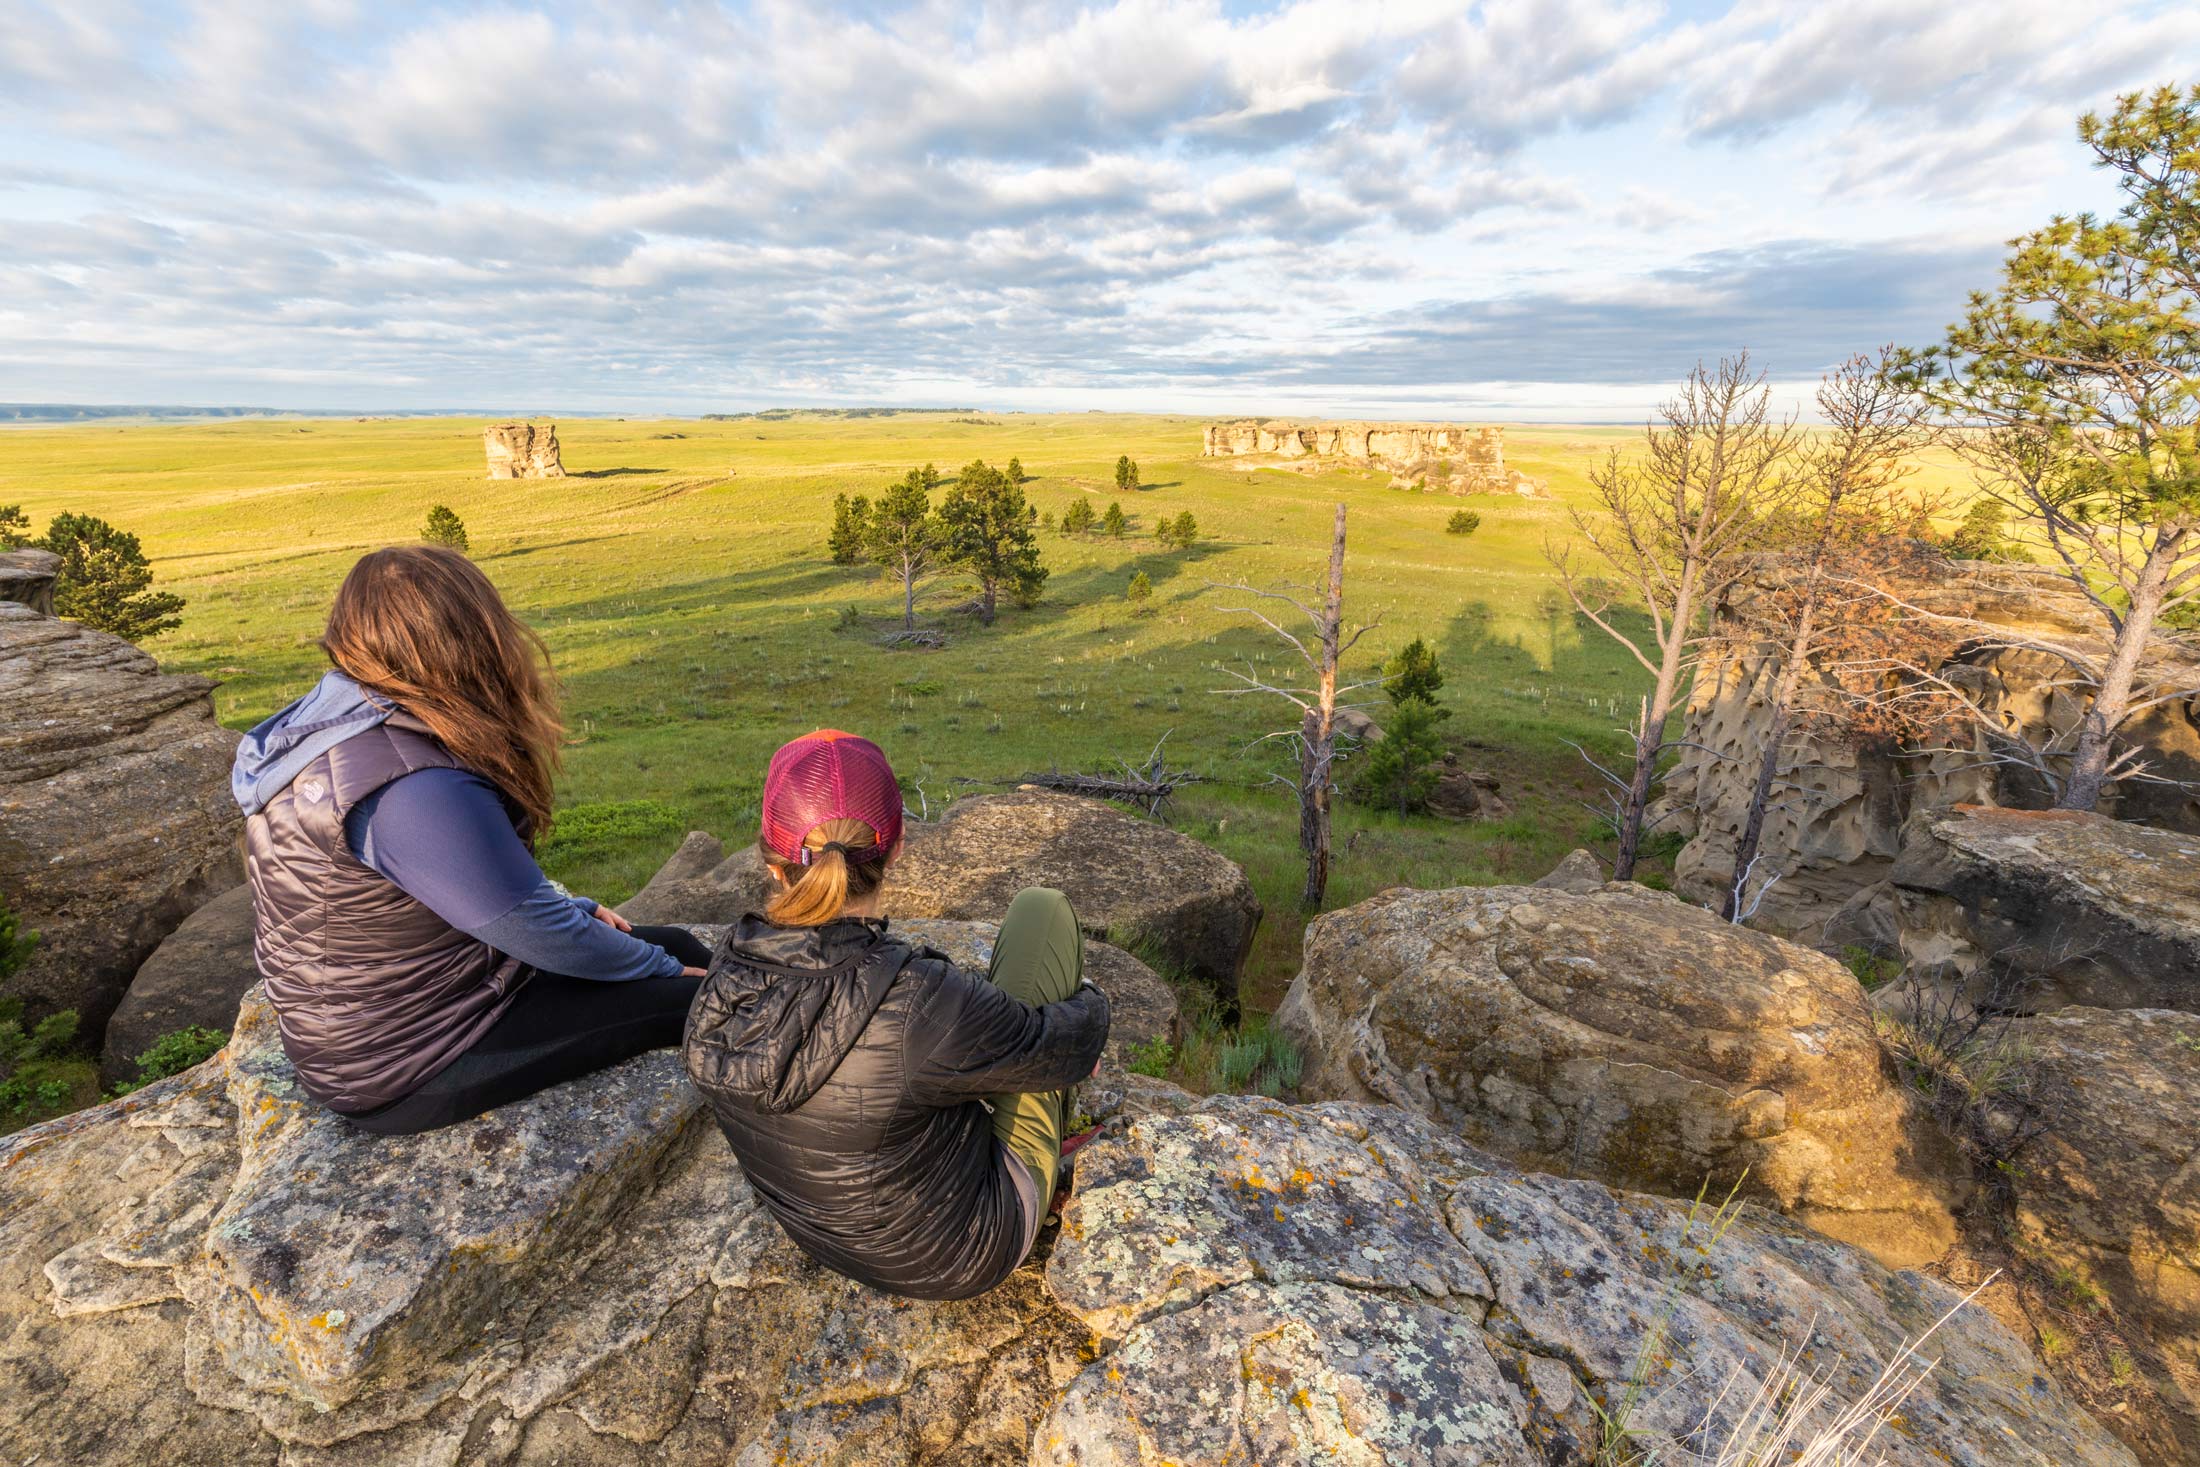 Southeast Montana’s Big, Open Spaces are the Perfect Place for an Escape: Part I